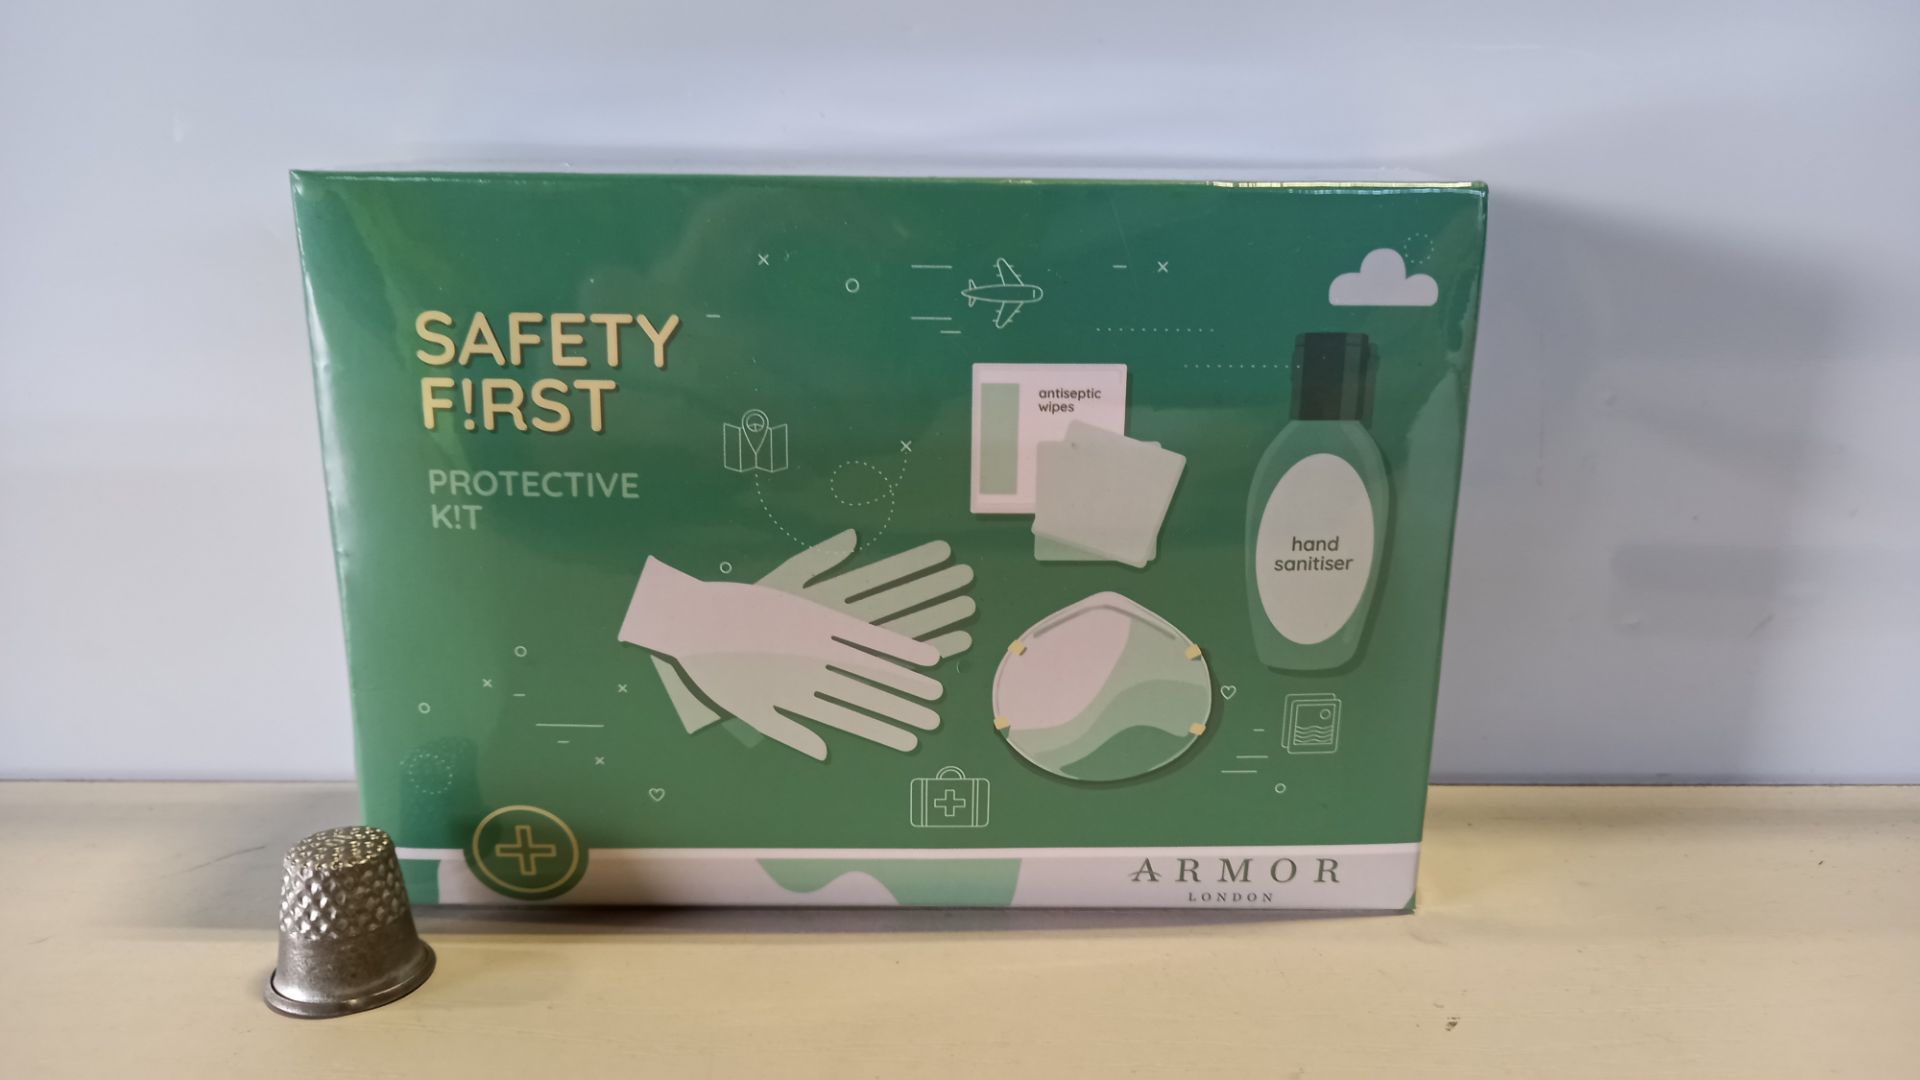 100 X BRAND NEW ARMOR LONDON SAFETY FIRST PROTECTIVE KIT (CONTAINS 1 X KN95 MASK, 1 X ANTI BACTERIAL